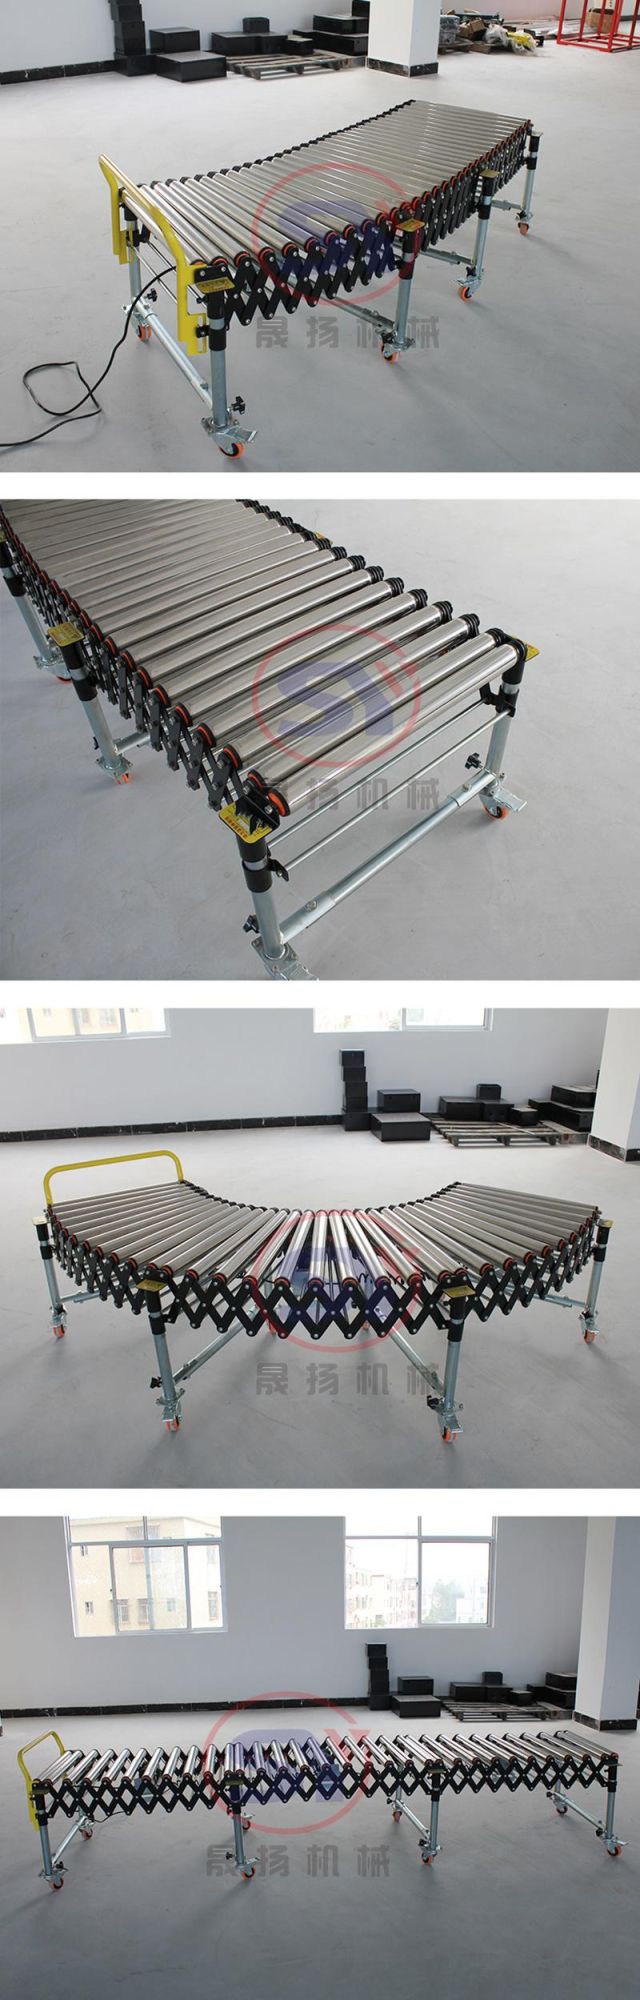 Industrial Stainless Steel Turn Roller Table Conveyor for Pallets Transmission